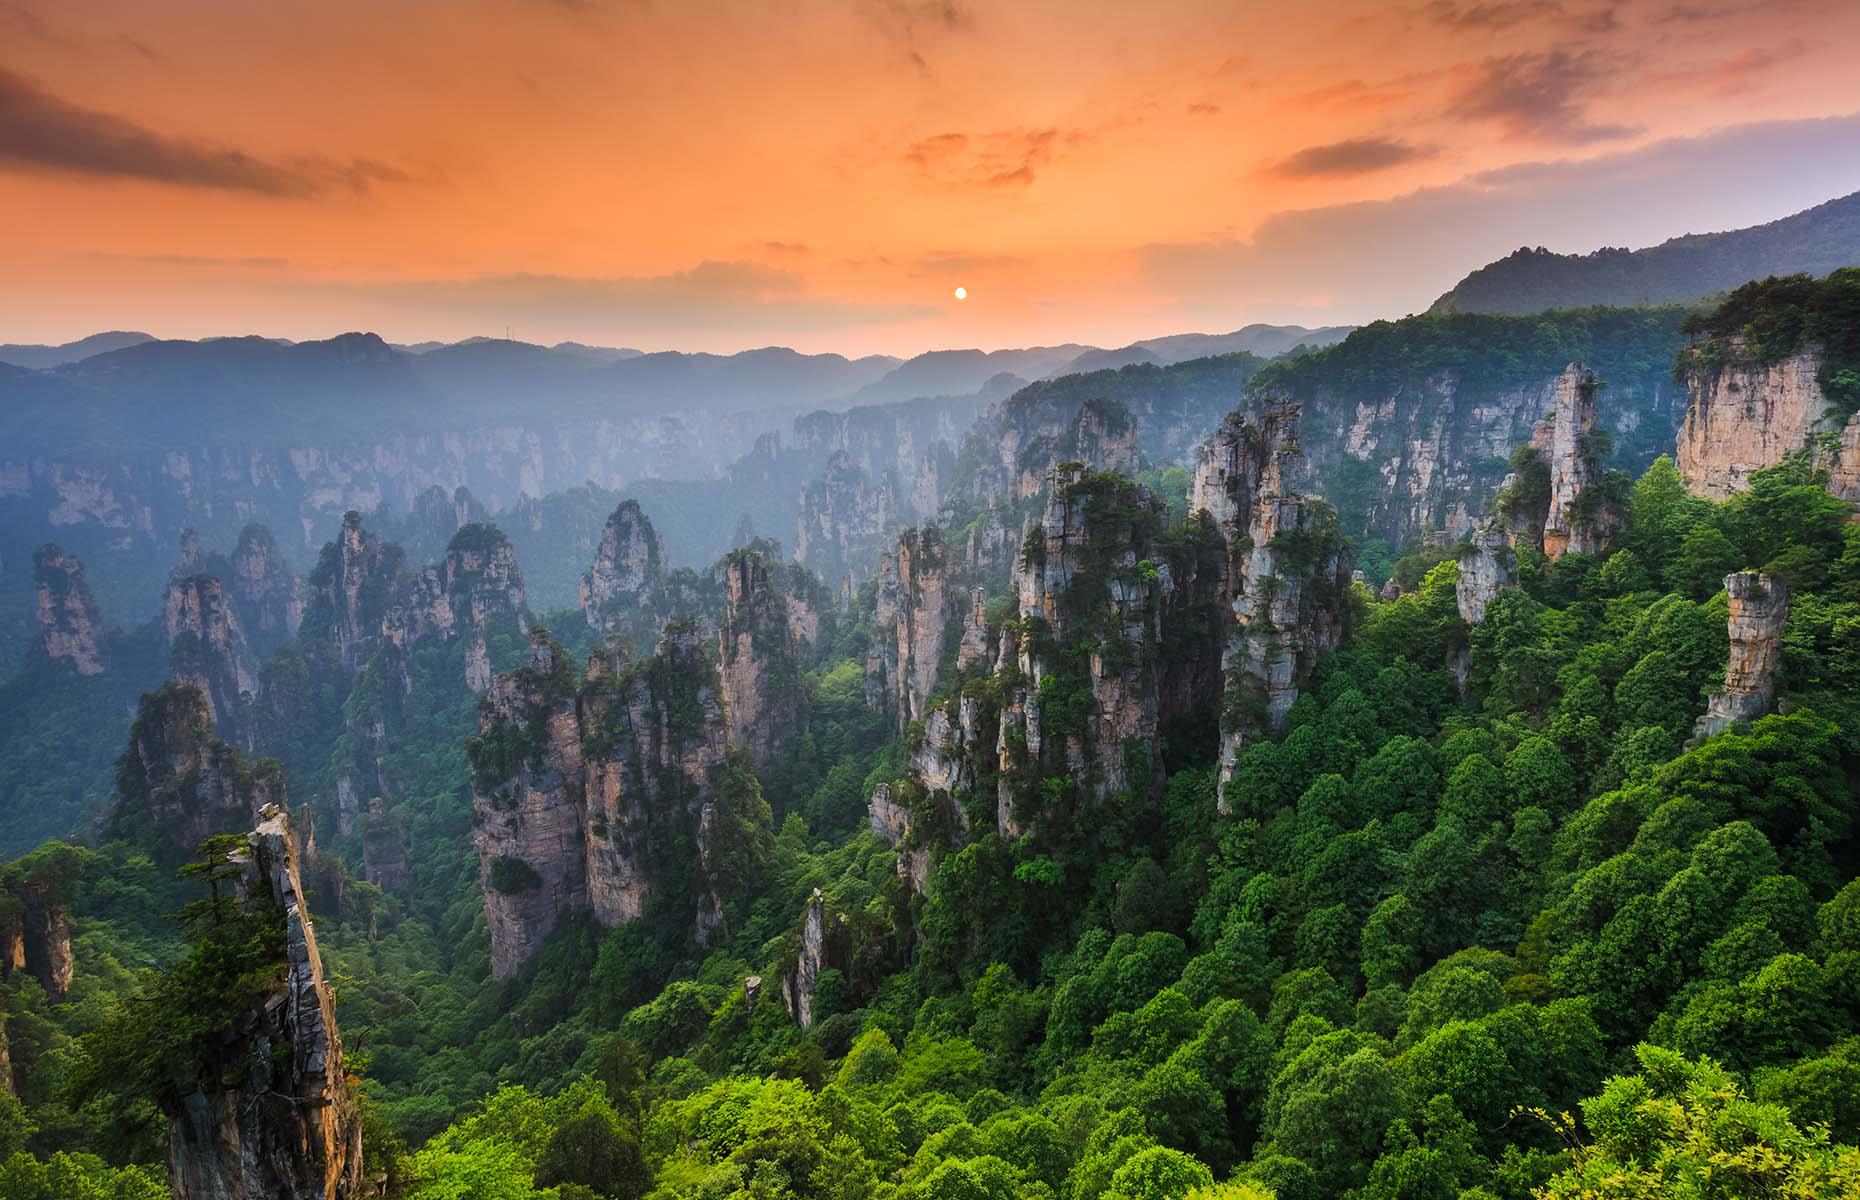 <p>It's not surprising the subtropical forests, deep ravines and towering sandstone buttes of Zhangjiajie National Forest Park served as the inspiration for the film <em>Avatar</em>. The place most definitely resembles a lost world. This ethereal spot is part of the vast UNESCO World Heritage Site of Wulingyuan Scenic and Historic Interest Area in central China’s Hunan Province, and is home to rare species such as the ginko tree as well unusual primates and birds.</p>  <p><a href="https://www.loveexploring.com/galleries/108269/incredible-landscapes-you-wont-believe-exist"><strong>You won't believe these landscapes actually exist</strong></a></p>